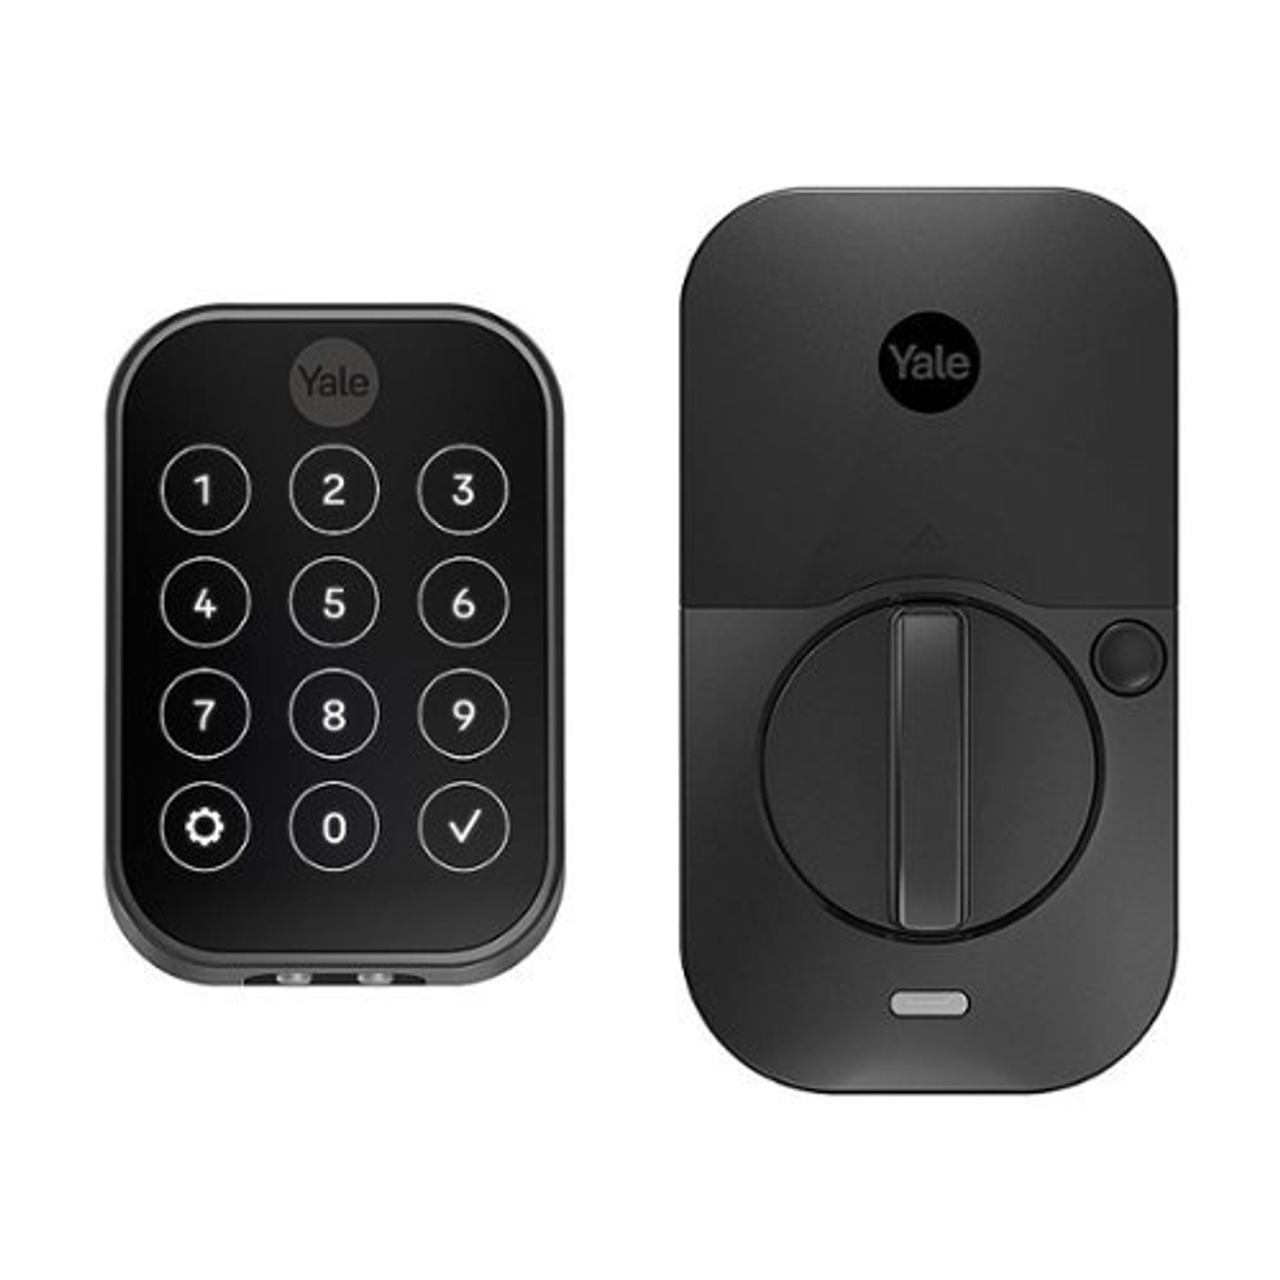 Yale - Assure Lock 2 Plus Smart Lock Bluetooth Replacement with Home Keys, Electronic Guest Keys, and Keypad Access - Black Suede